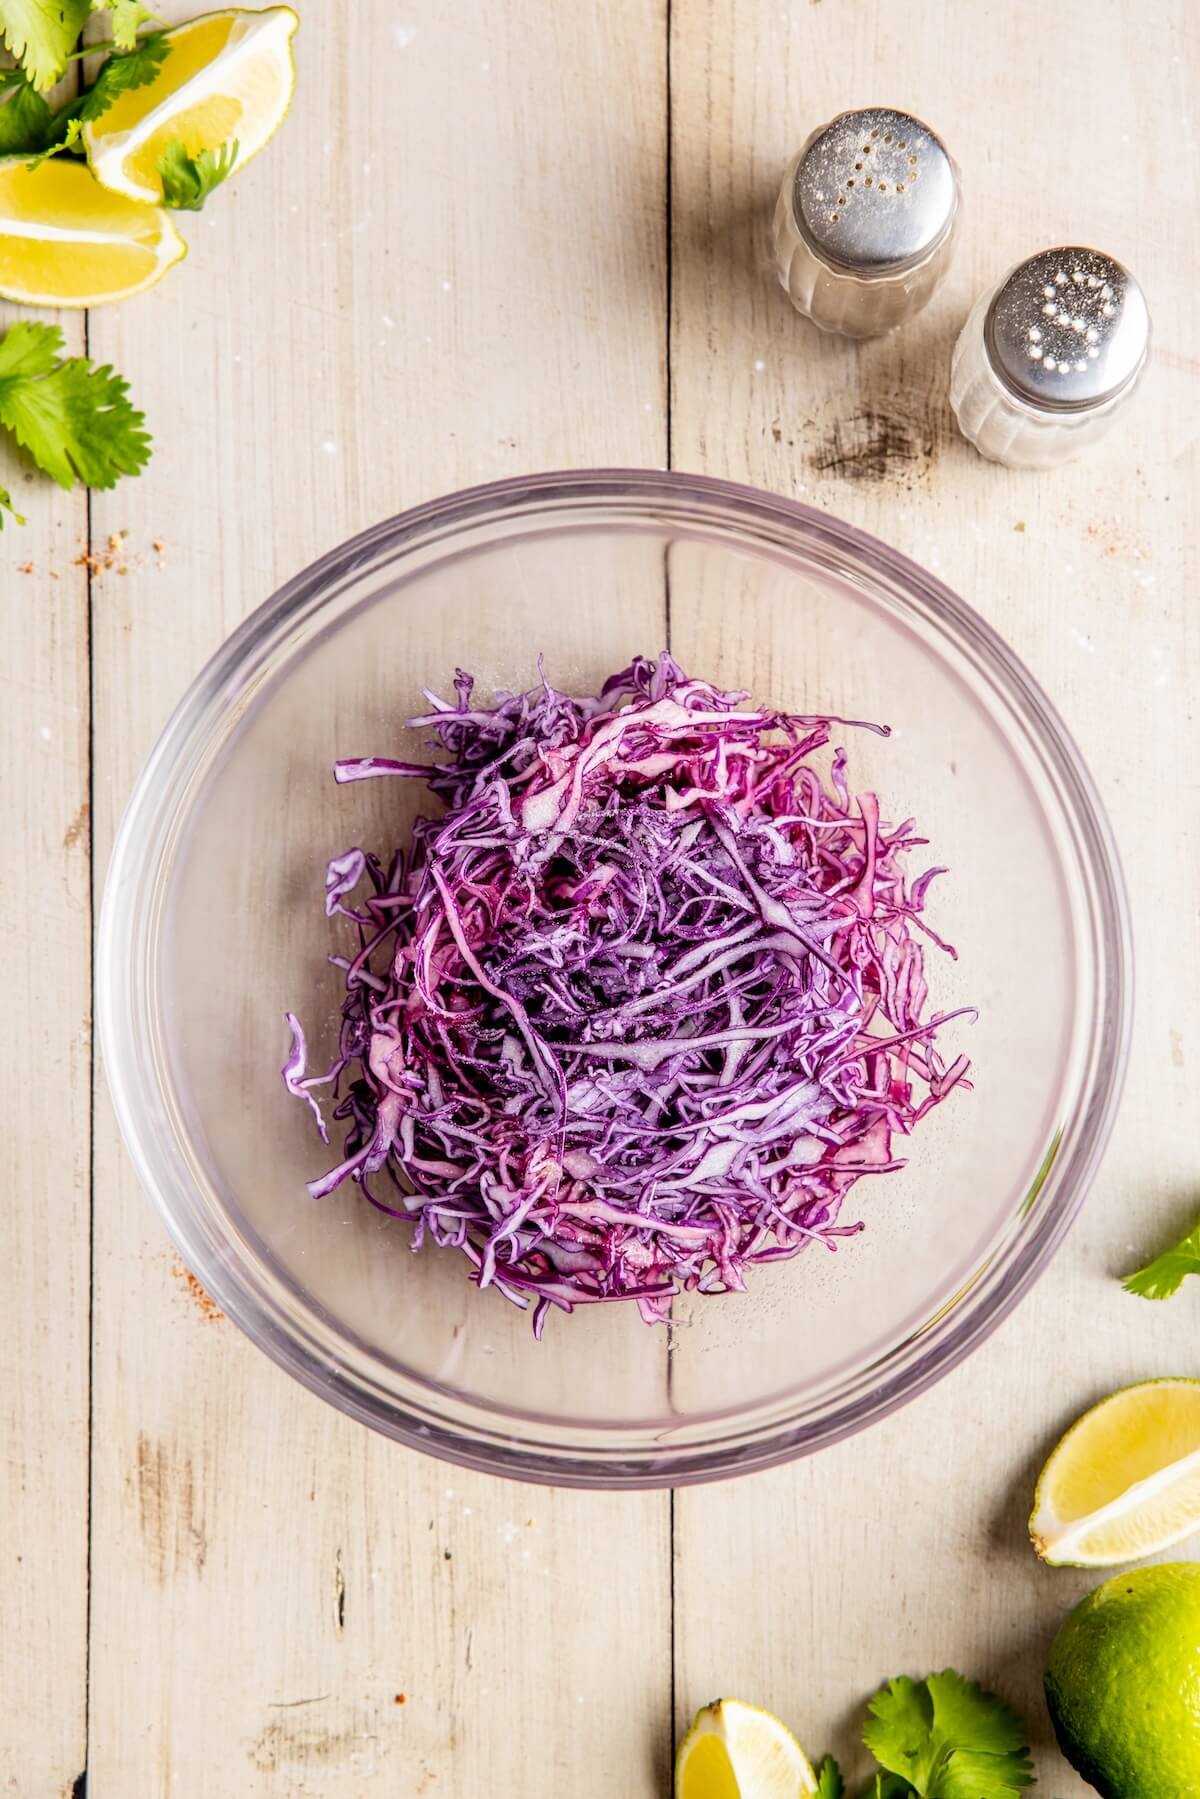 Cabbage Slaw for Saucy Braised Chicken Tacos